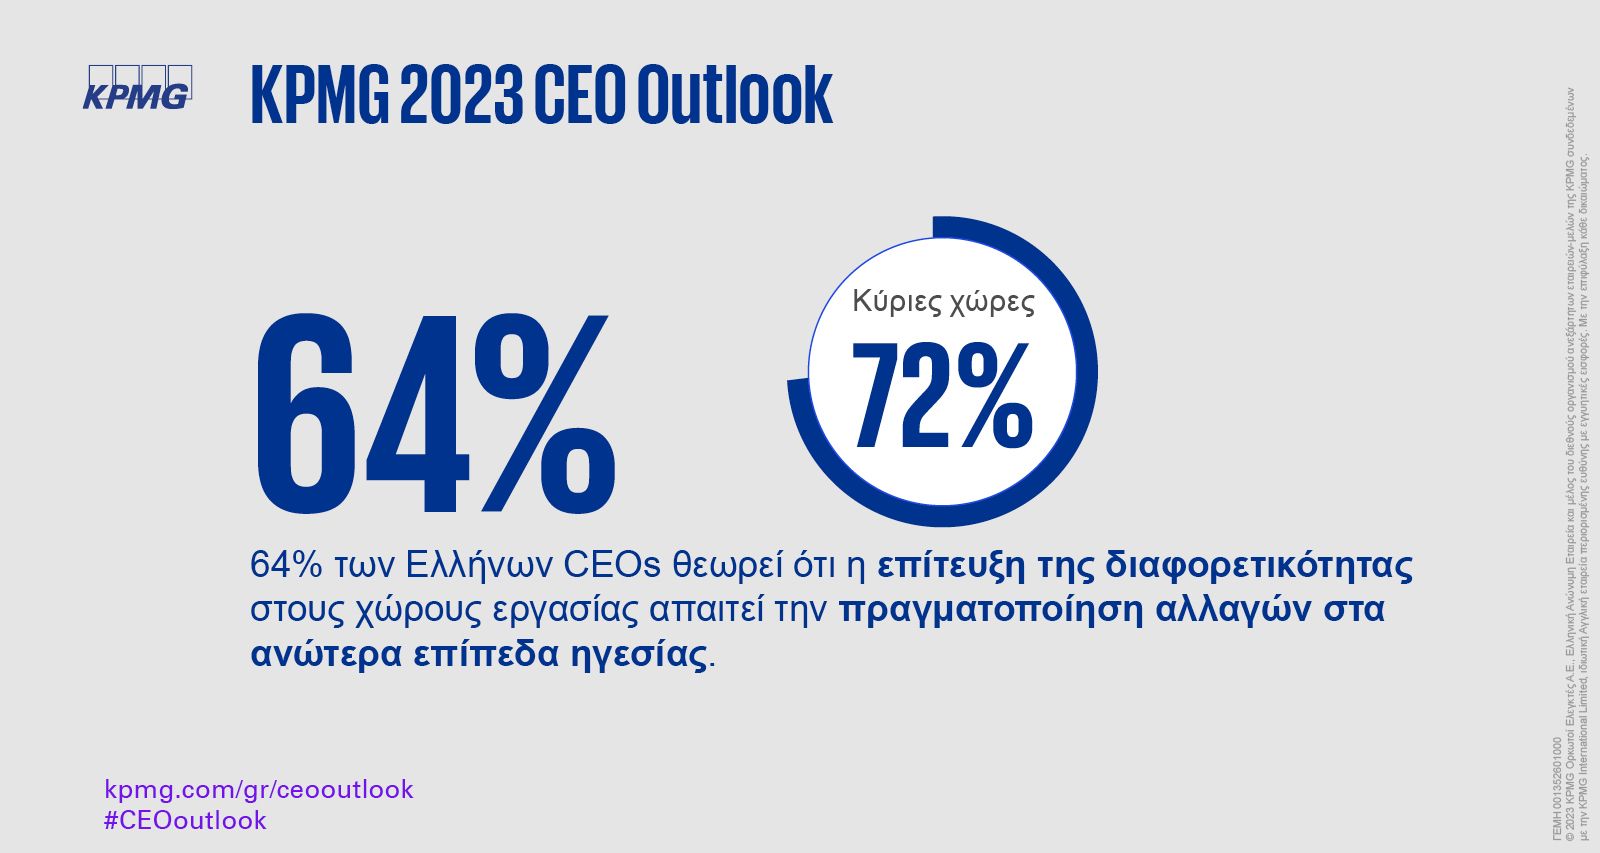 2023 CEO Outlook infographic